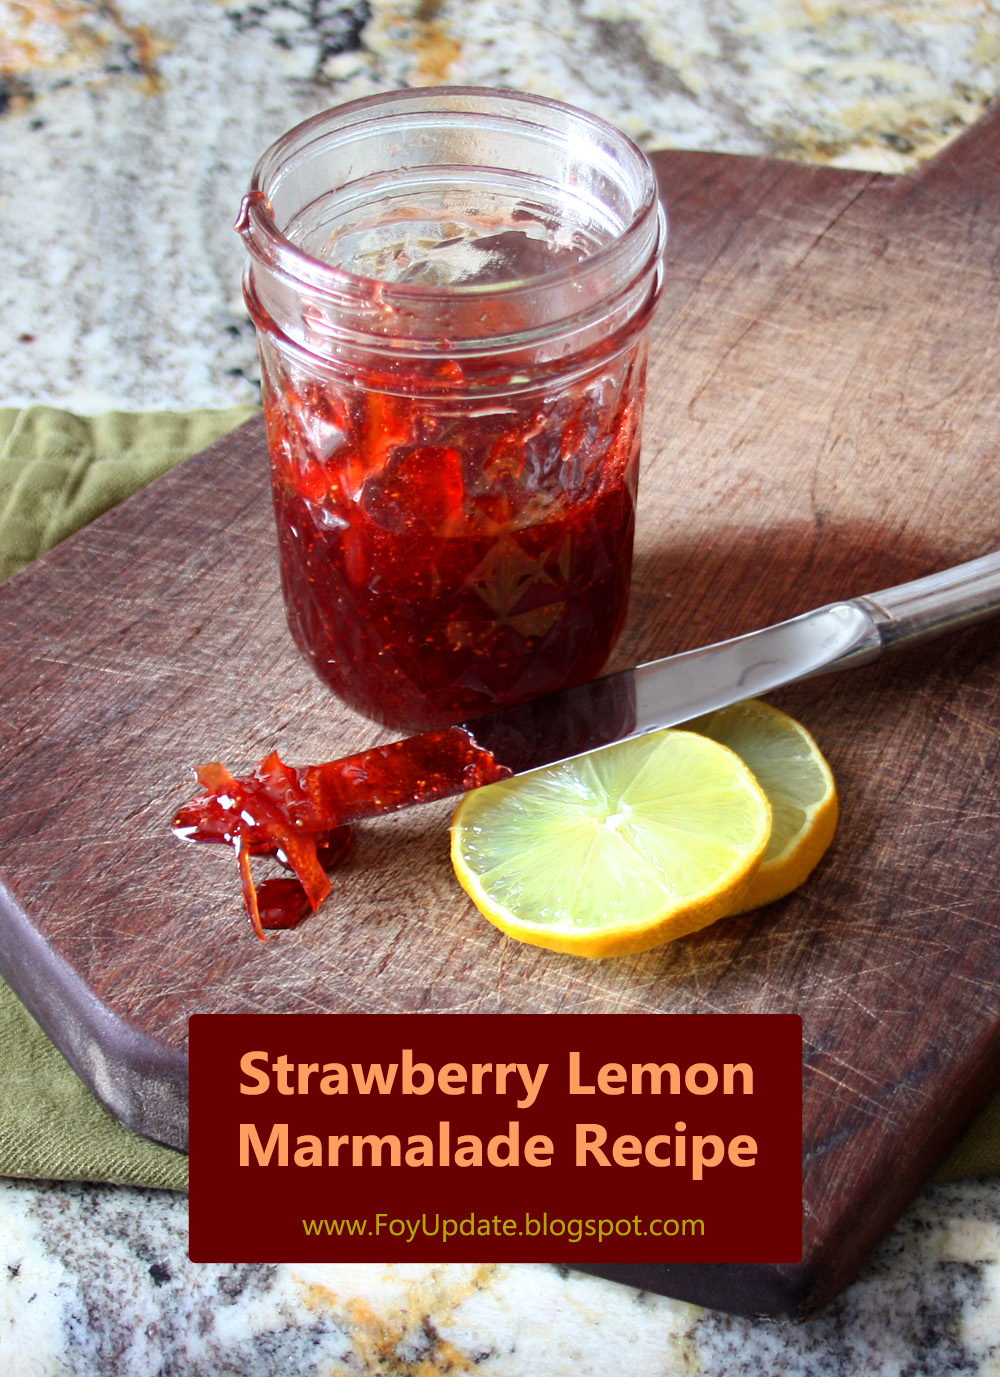 Strawberry Lemon Marmalade - a shot of summer to get you through the cold winter